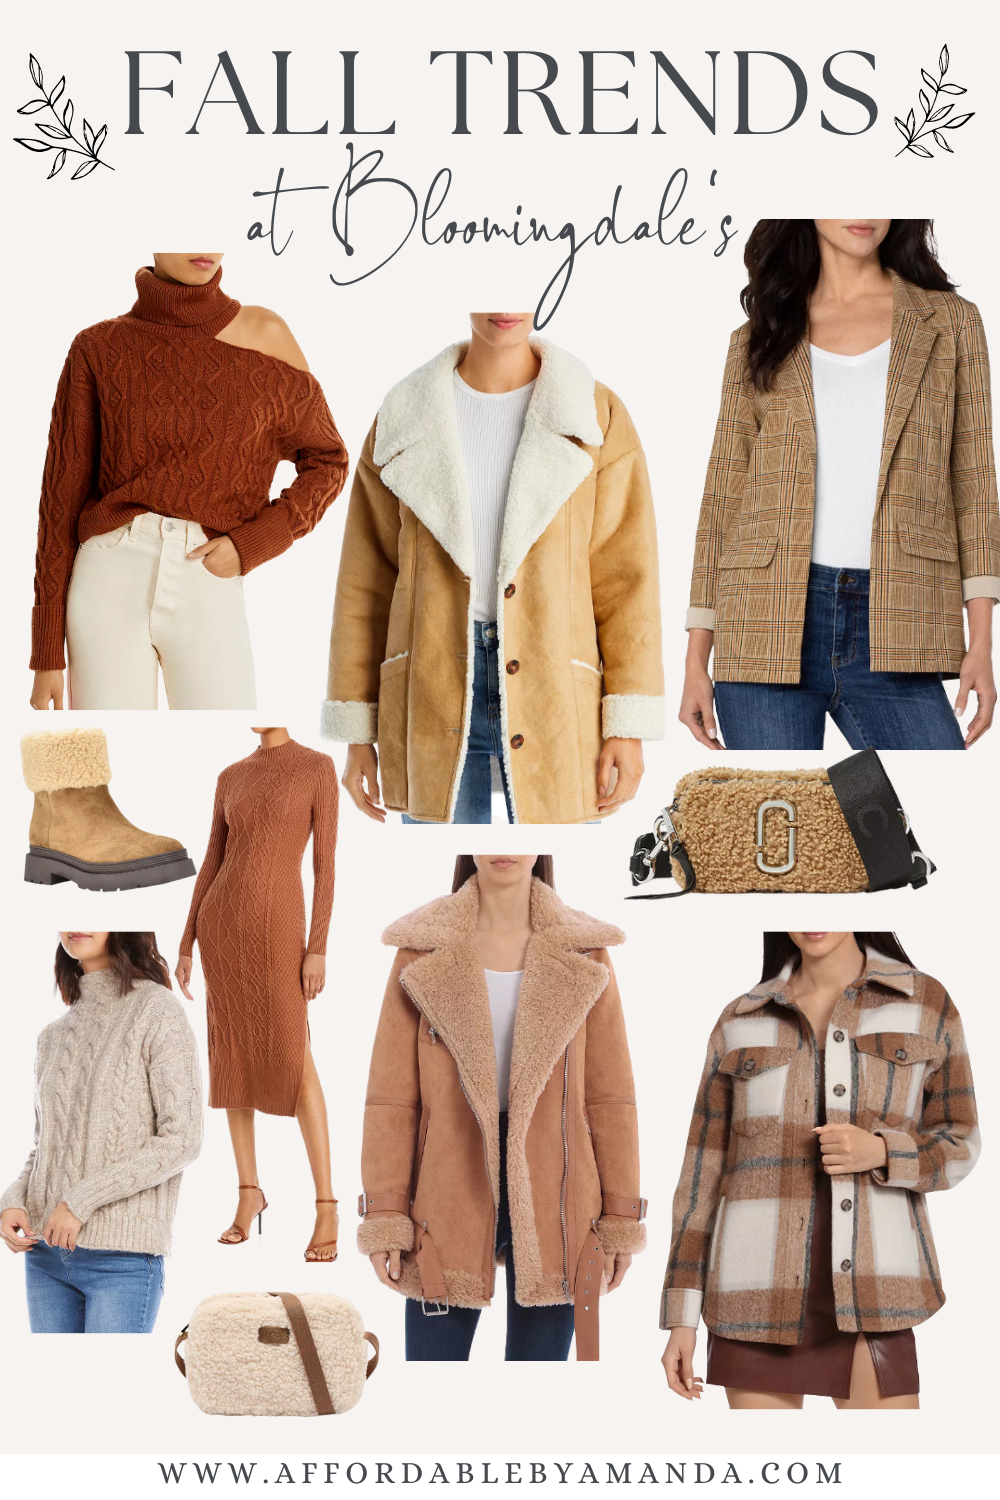 Fall Trends at Bloomingdales | New Fall Fashion Finds at Bloomingdales | Bloomingdale's Designer Clothing for Fall 2022